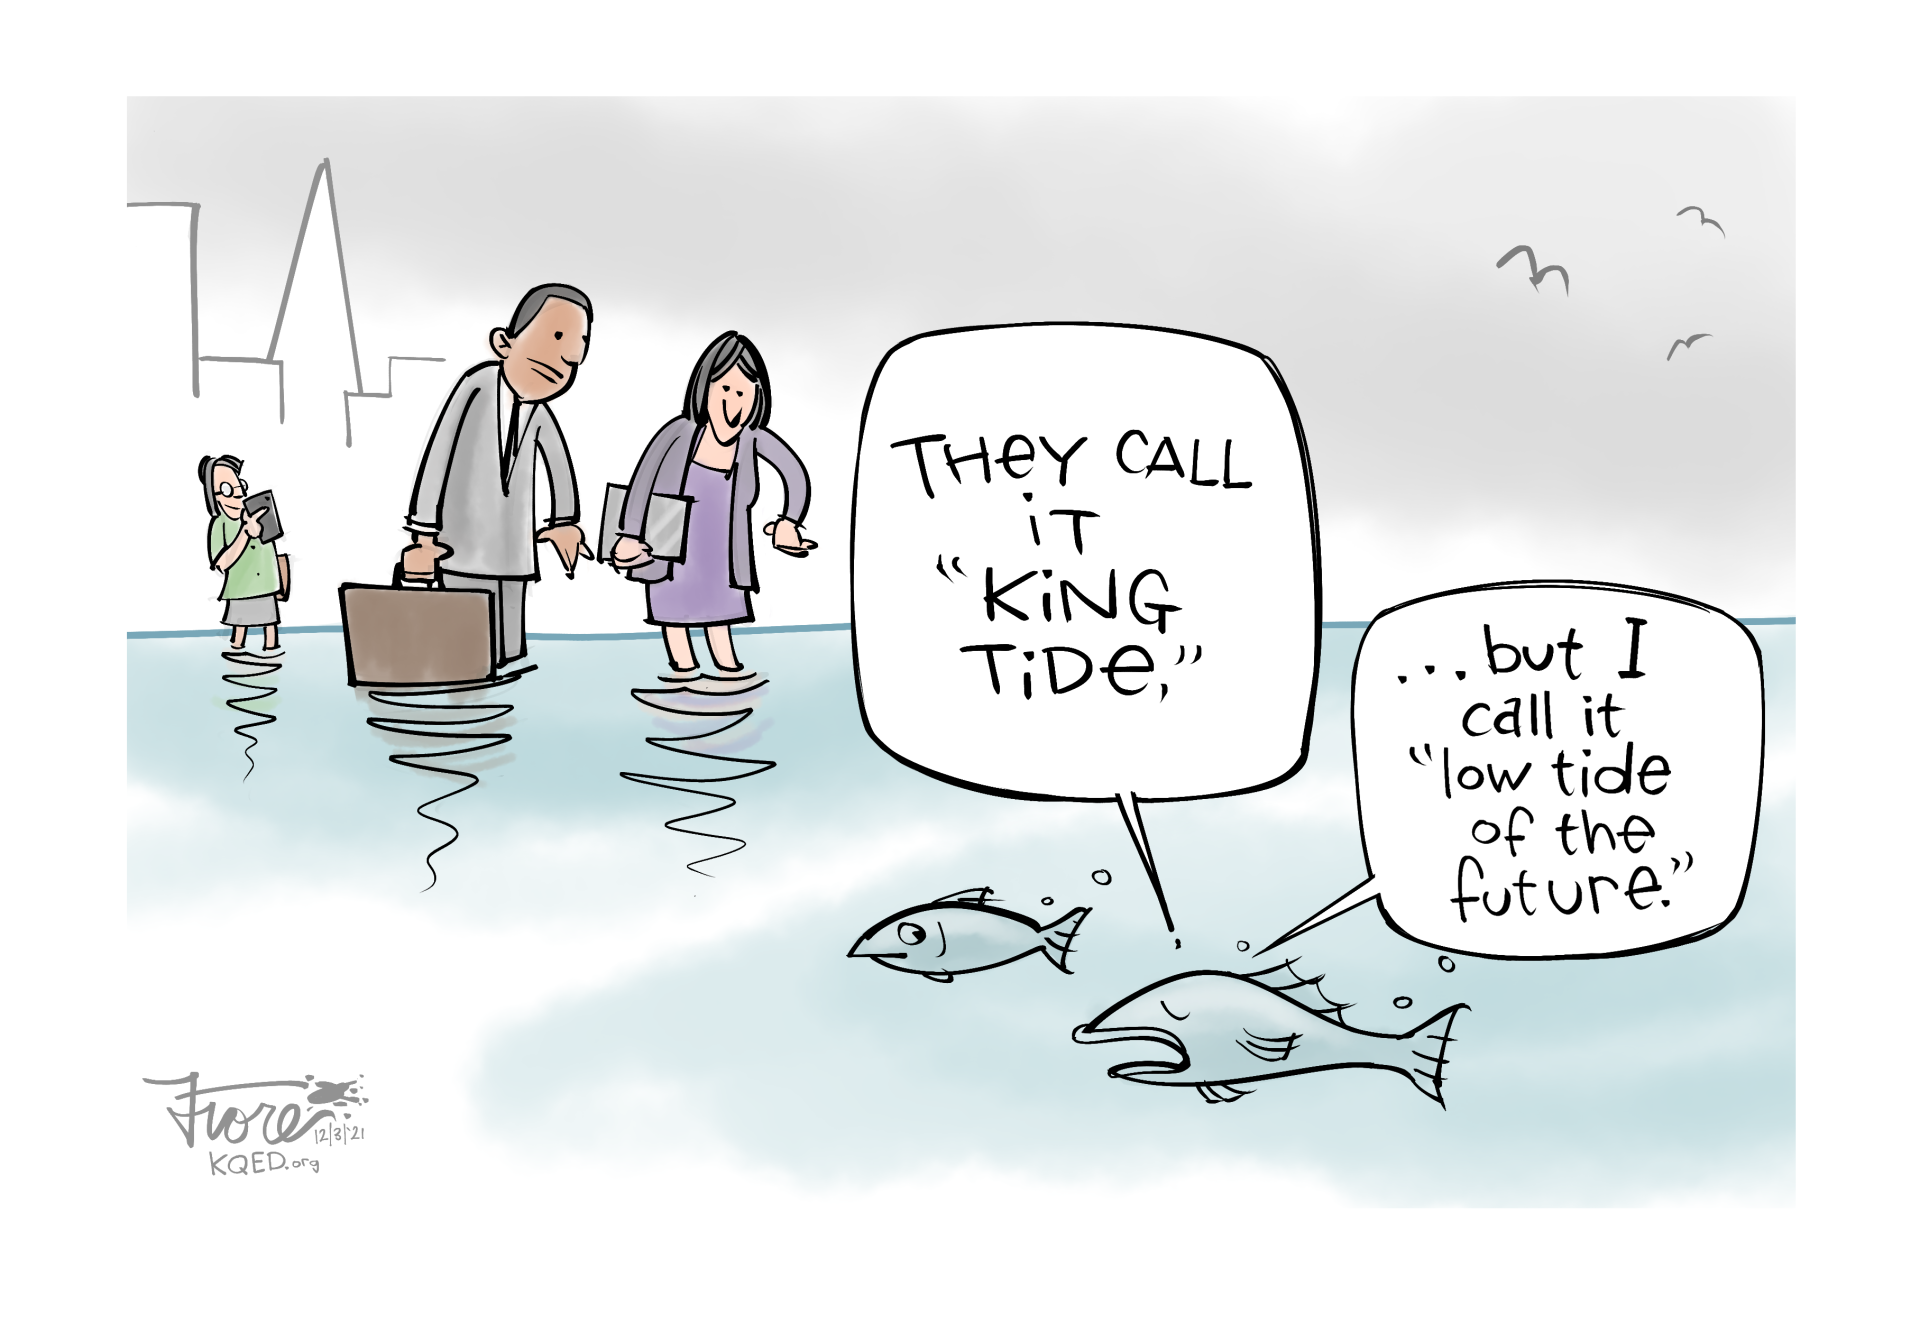 Cartoon: people in downtown San Francisco standing in water, we see a fish talk to another fish, saying, "they call it 'king tide,' but I call it 'low tide of the future'."